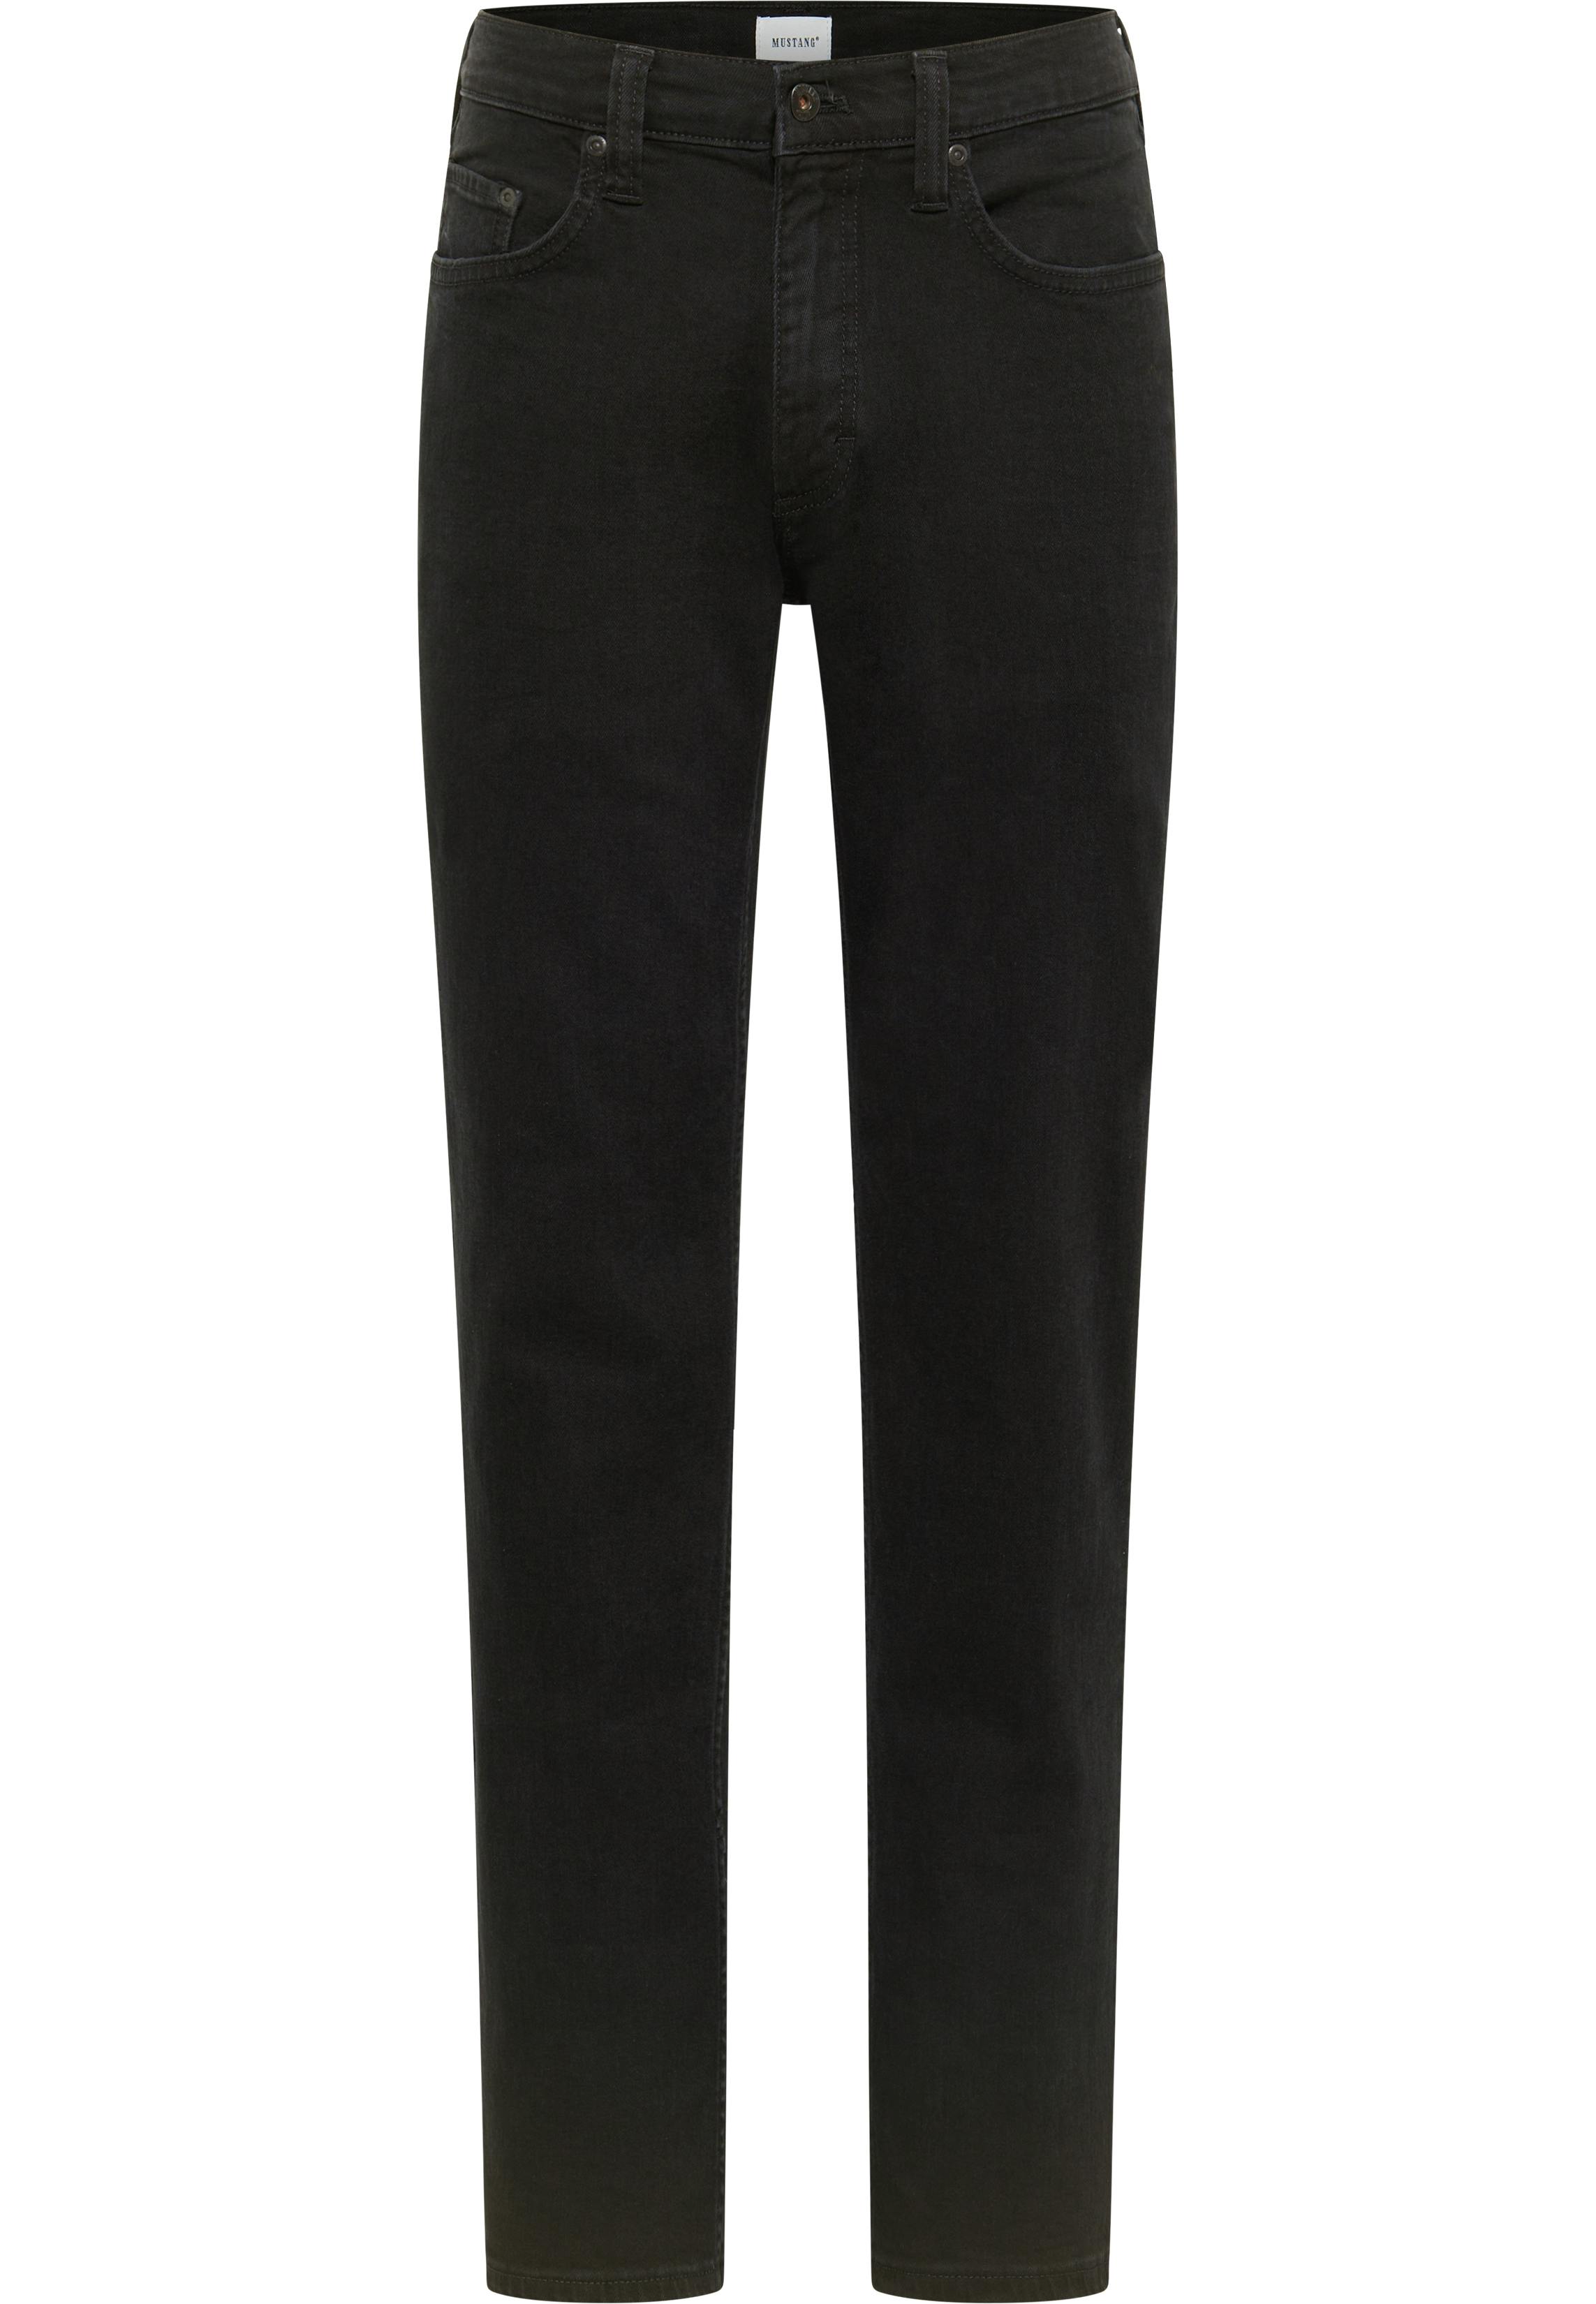 Image of Mustang Jeans Big Sur Straight black extra lang